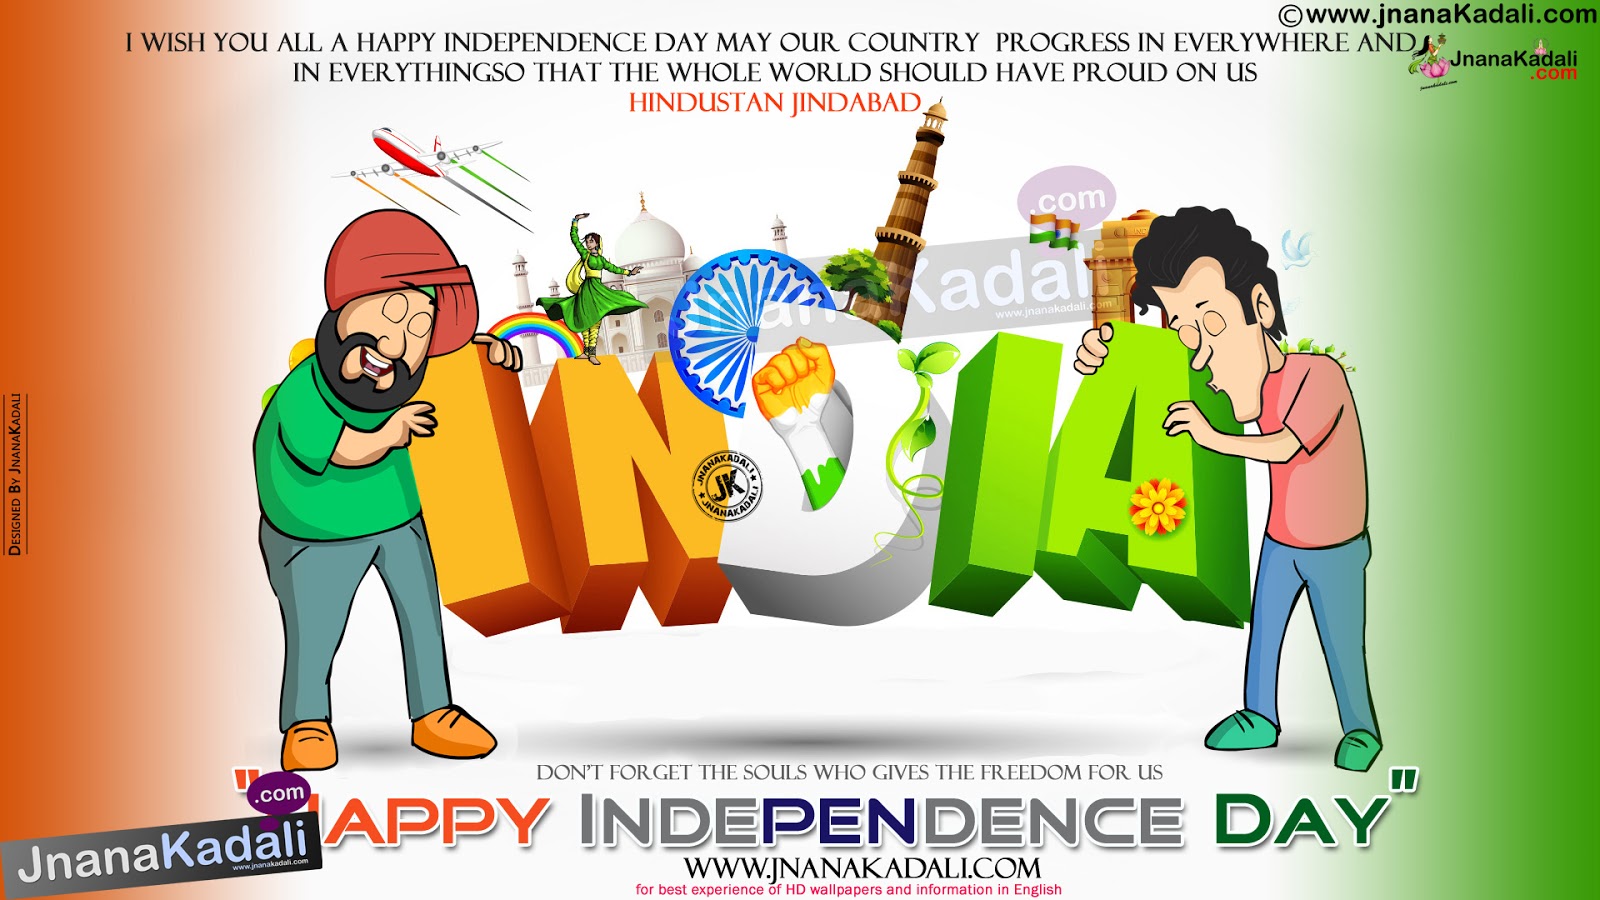 69th Independence Day Greetings and Wishes images in English ...